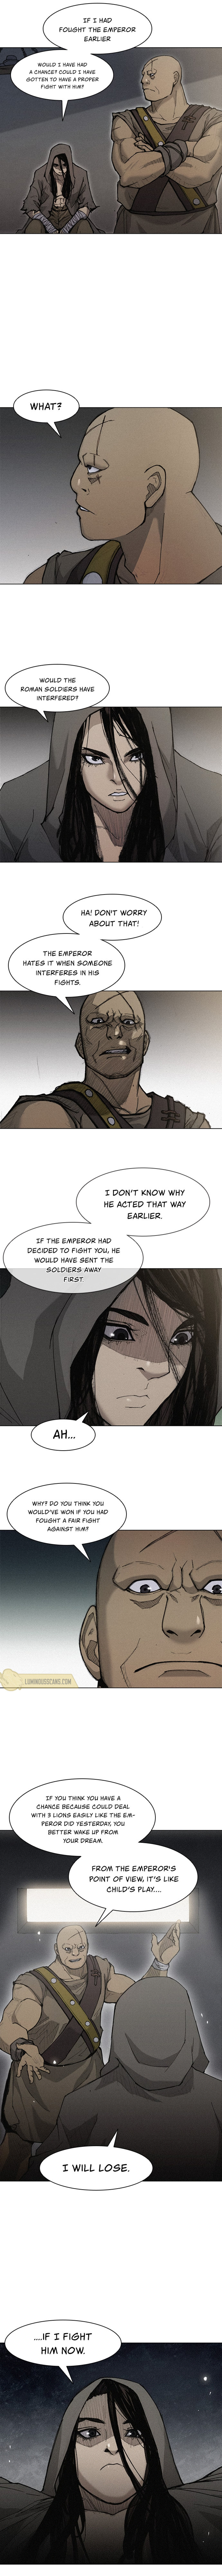 Long Way of the Warrior - Chapter 22 Page 6